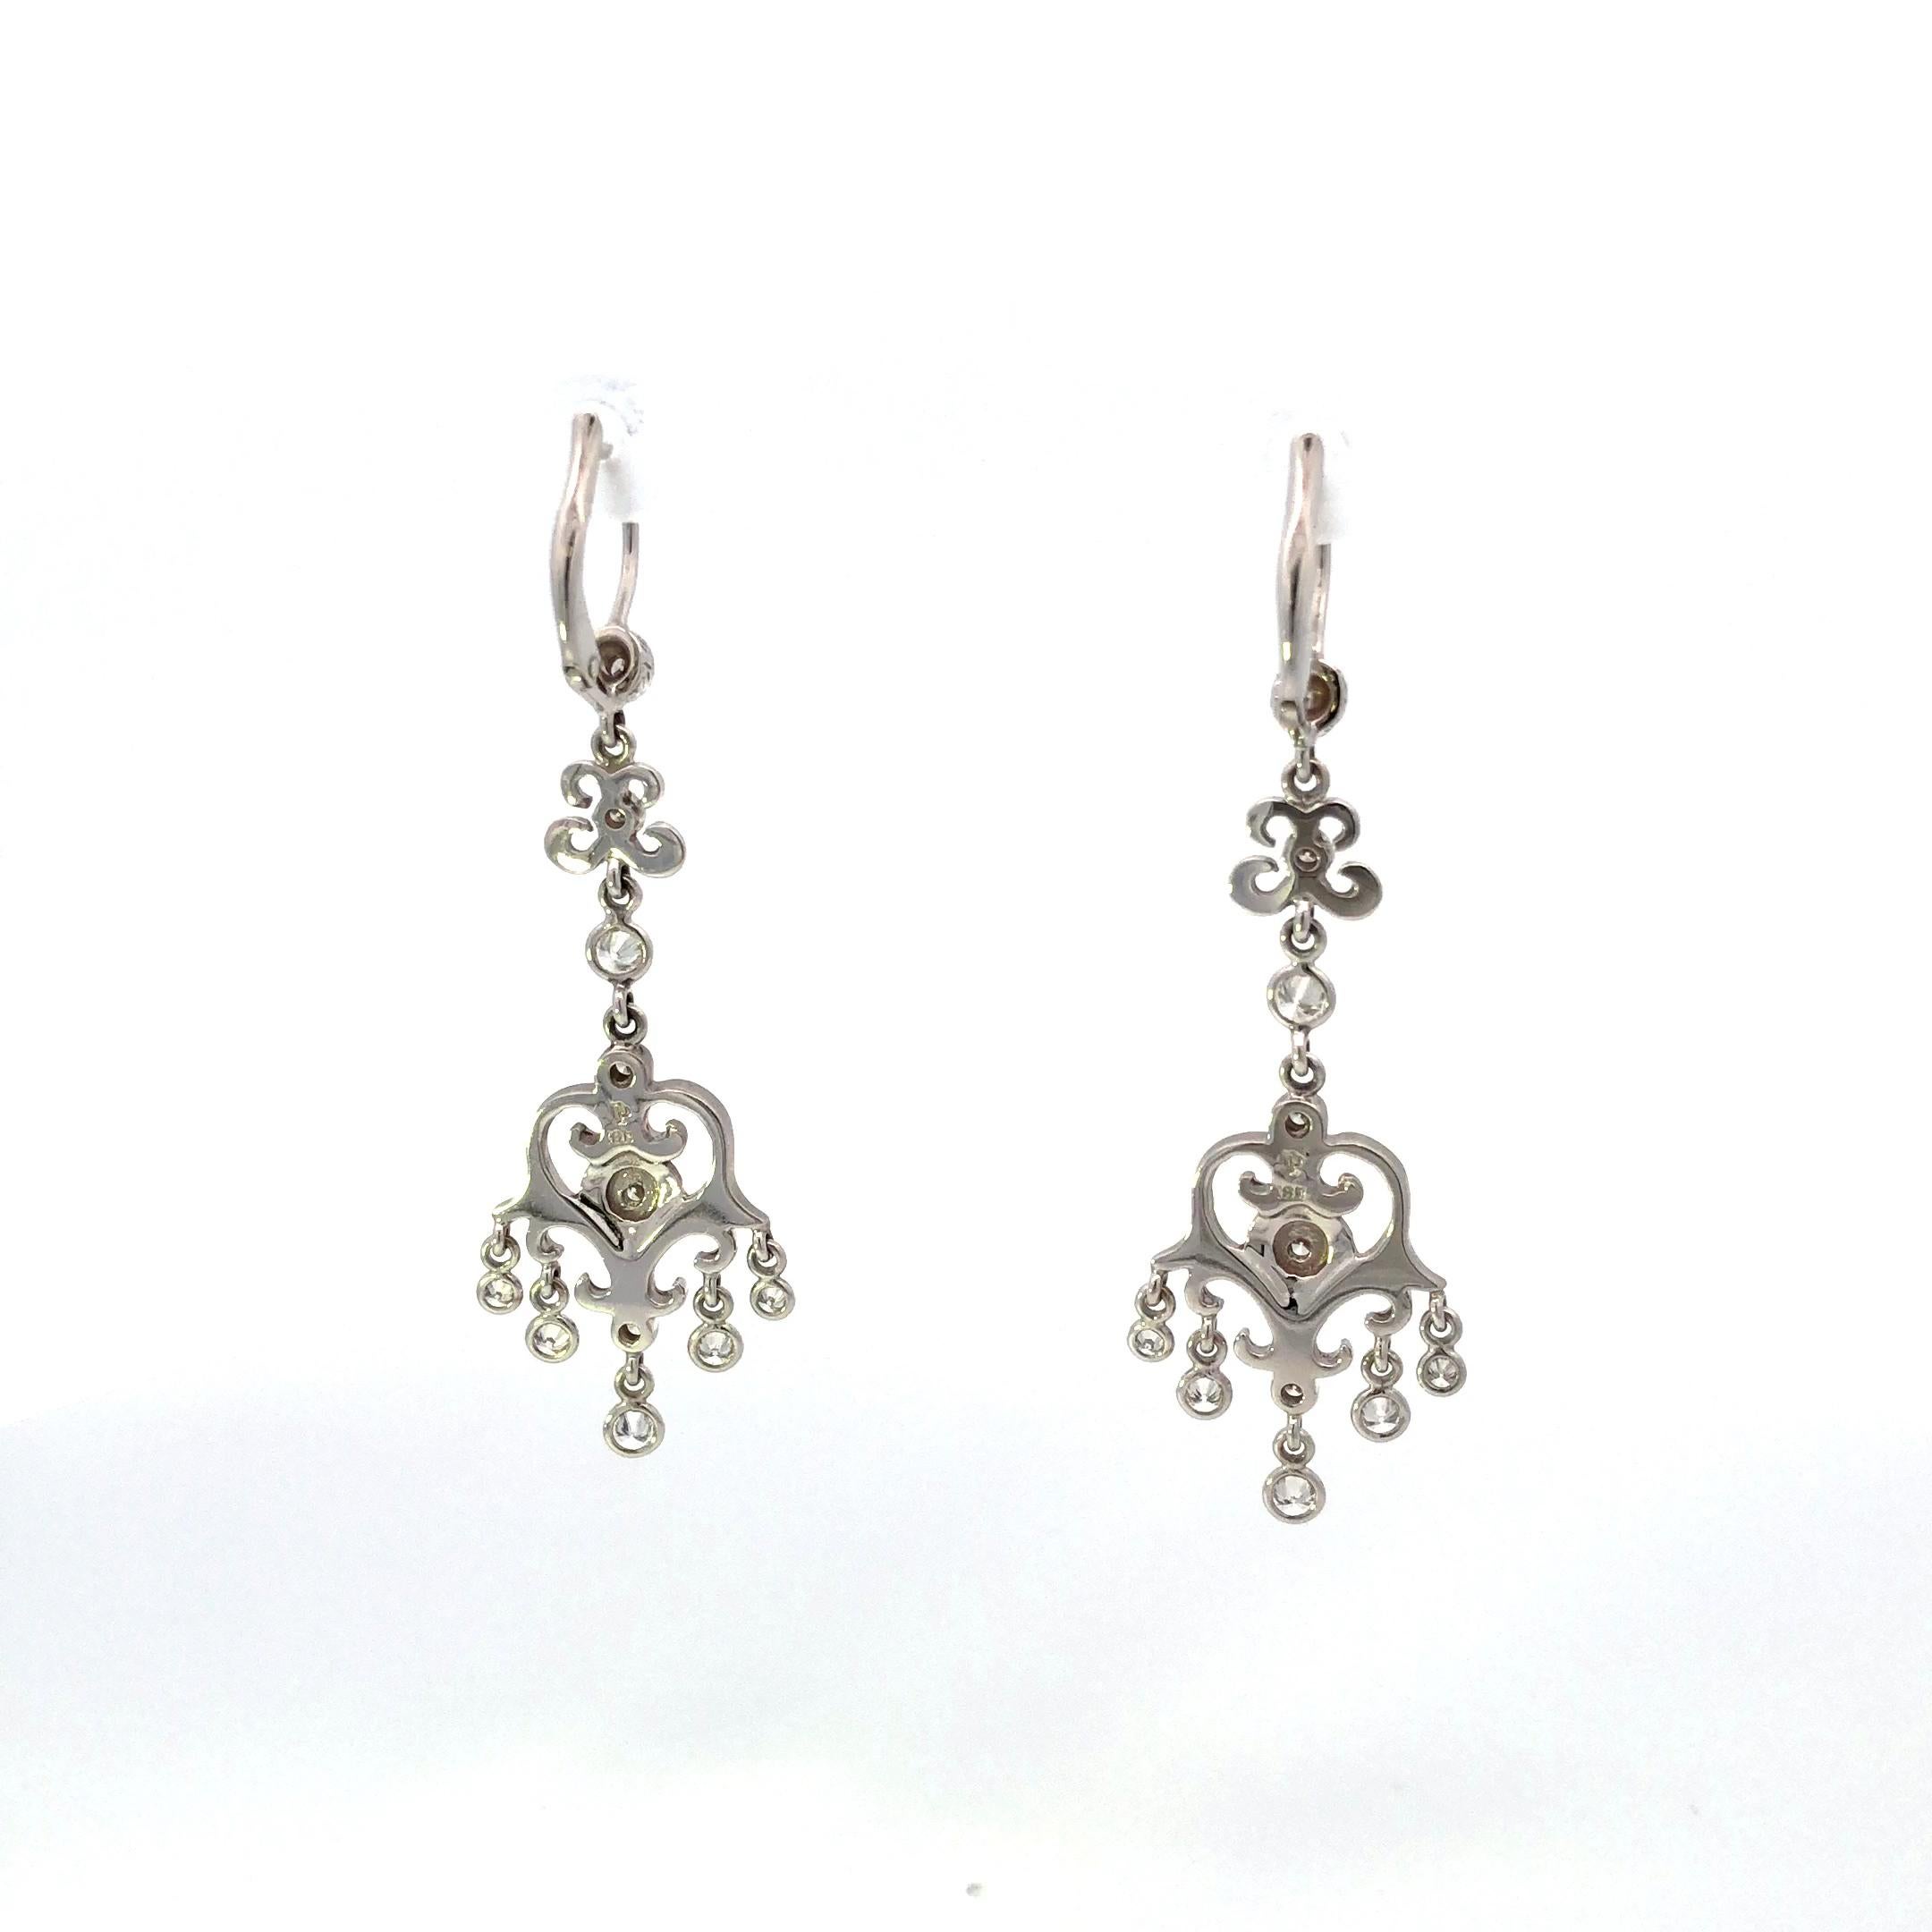 Crafted with exceptional artistry, these 18K white gold Penny Preville earrings feature a dazzling display of 22 round diamonds, totaling approximately 0.60 carats.

Designed in a chandelier style, these earrings exude a sense of luxury and